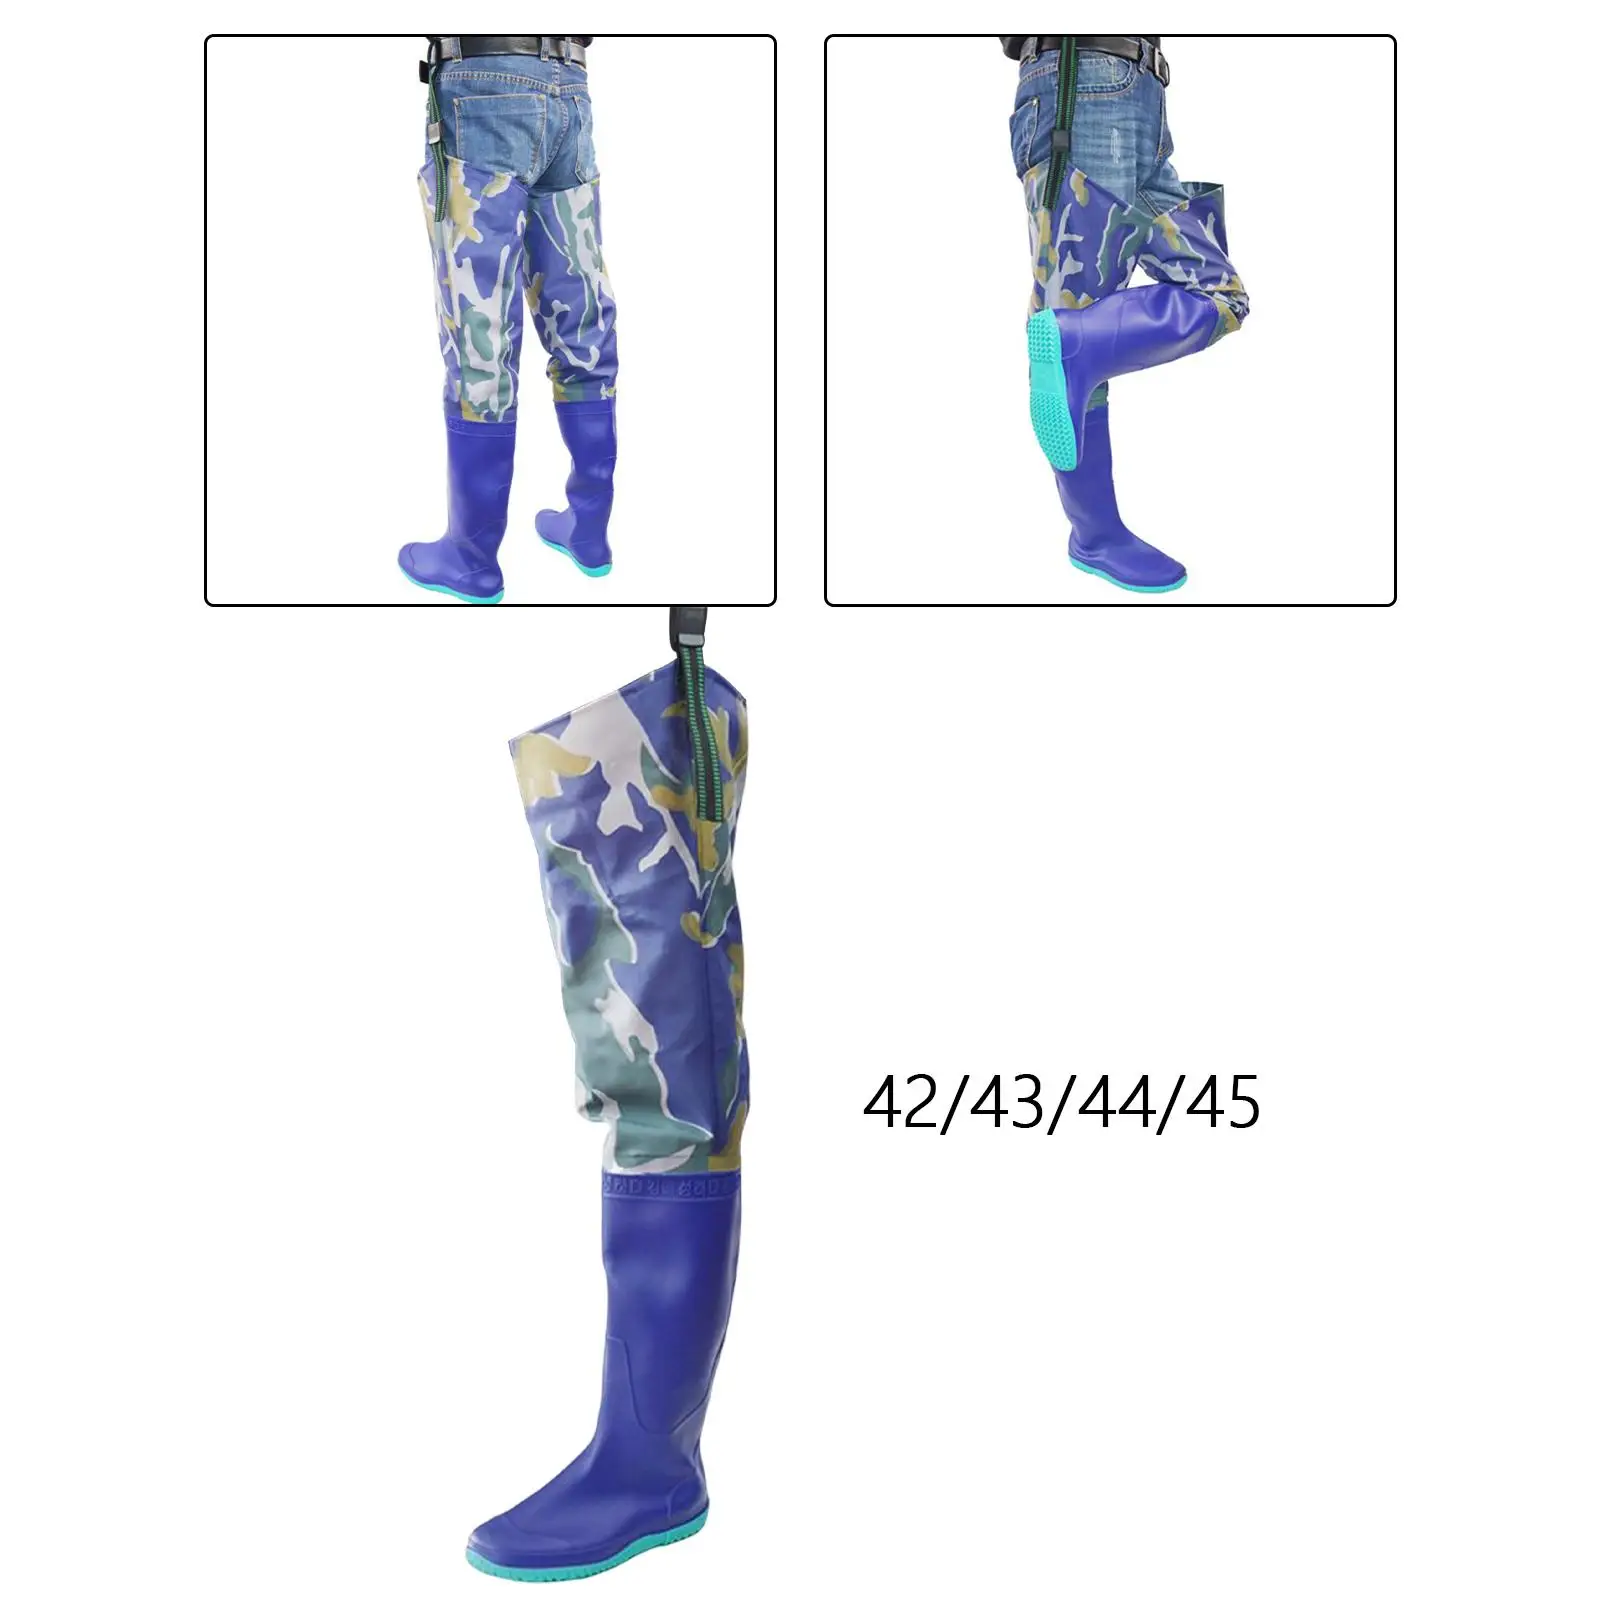 Hip Waders Watertight Hip Boots for Men Women Wading Pants Thigh Waders Wellies Fishing Waders for Wading Fishing Agriculture